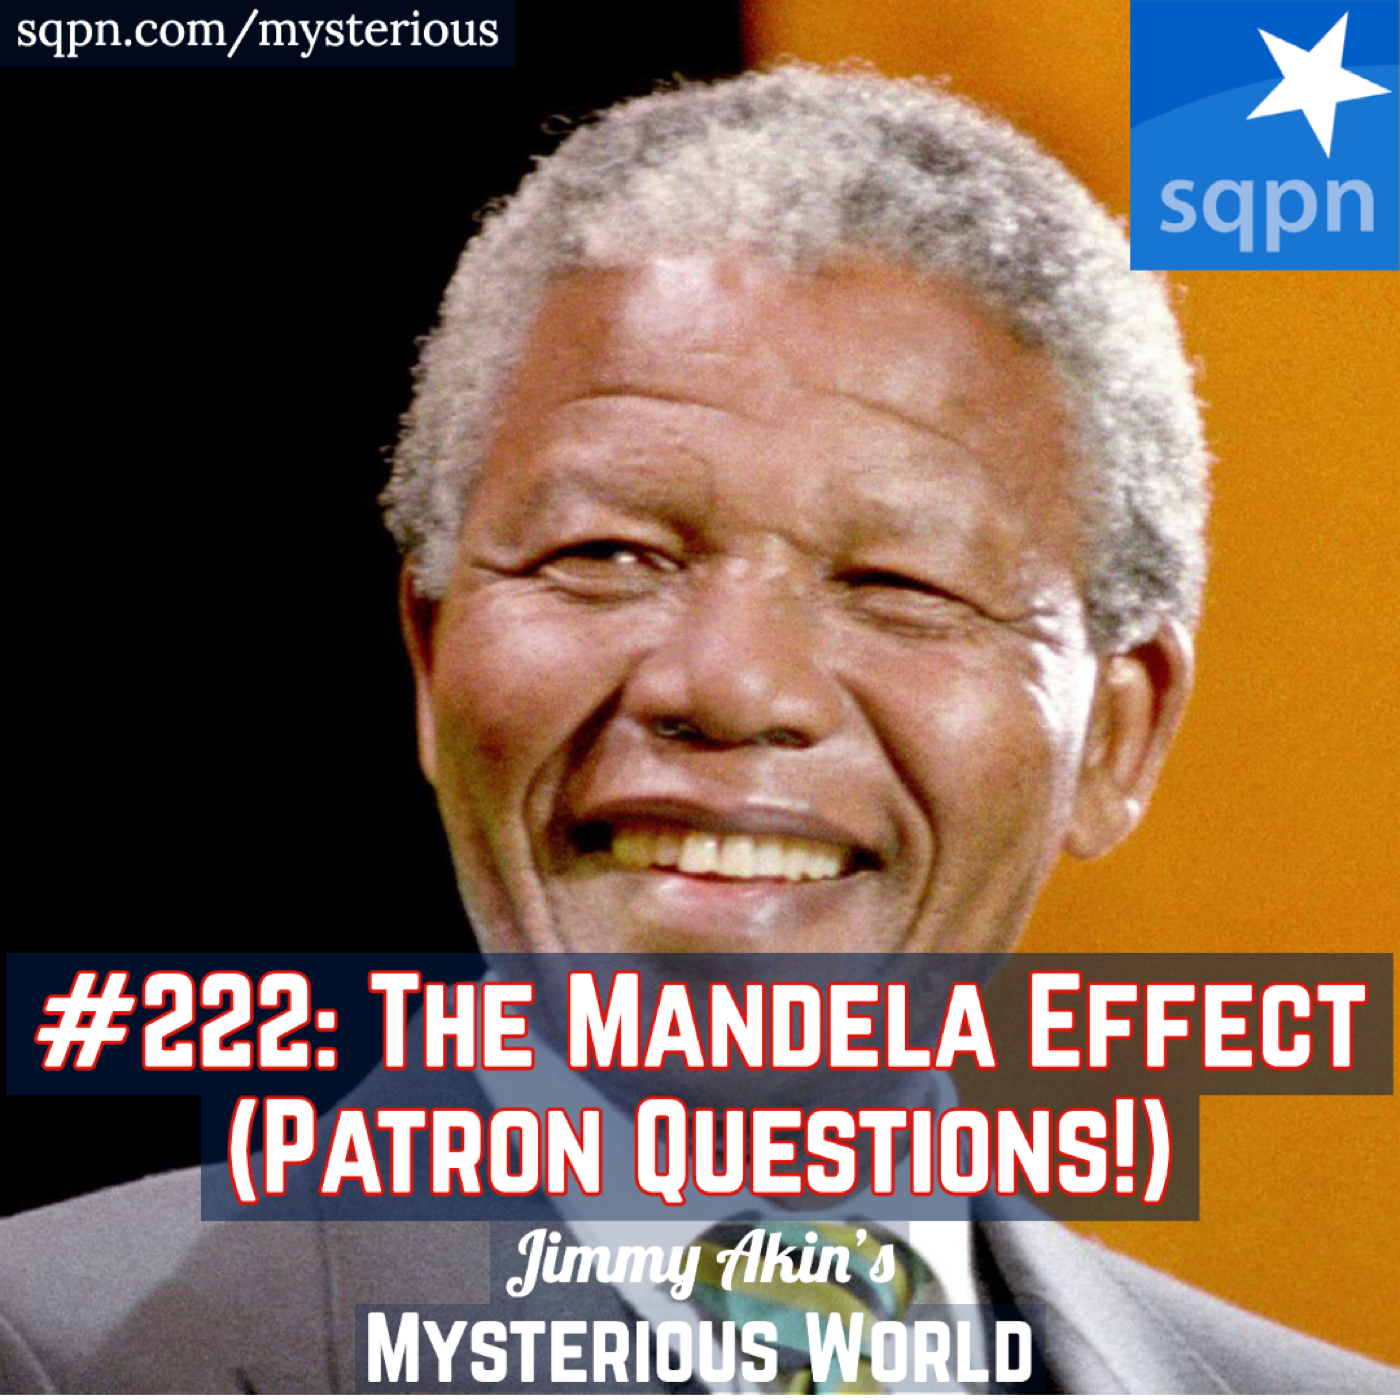 The Mandela Effect, the Full Moon effect, the Third Secret of Fatima, & More Patrons’ Questions